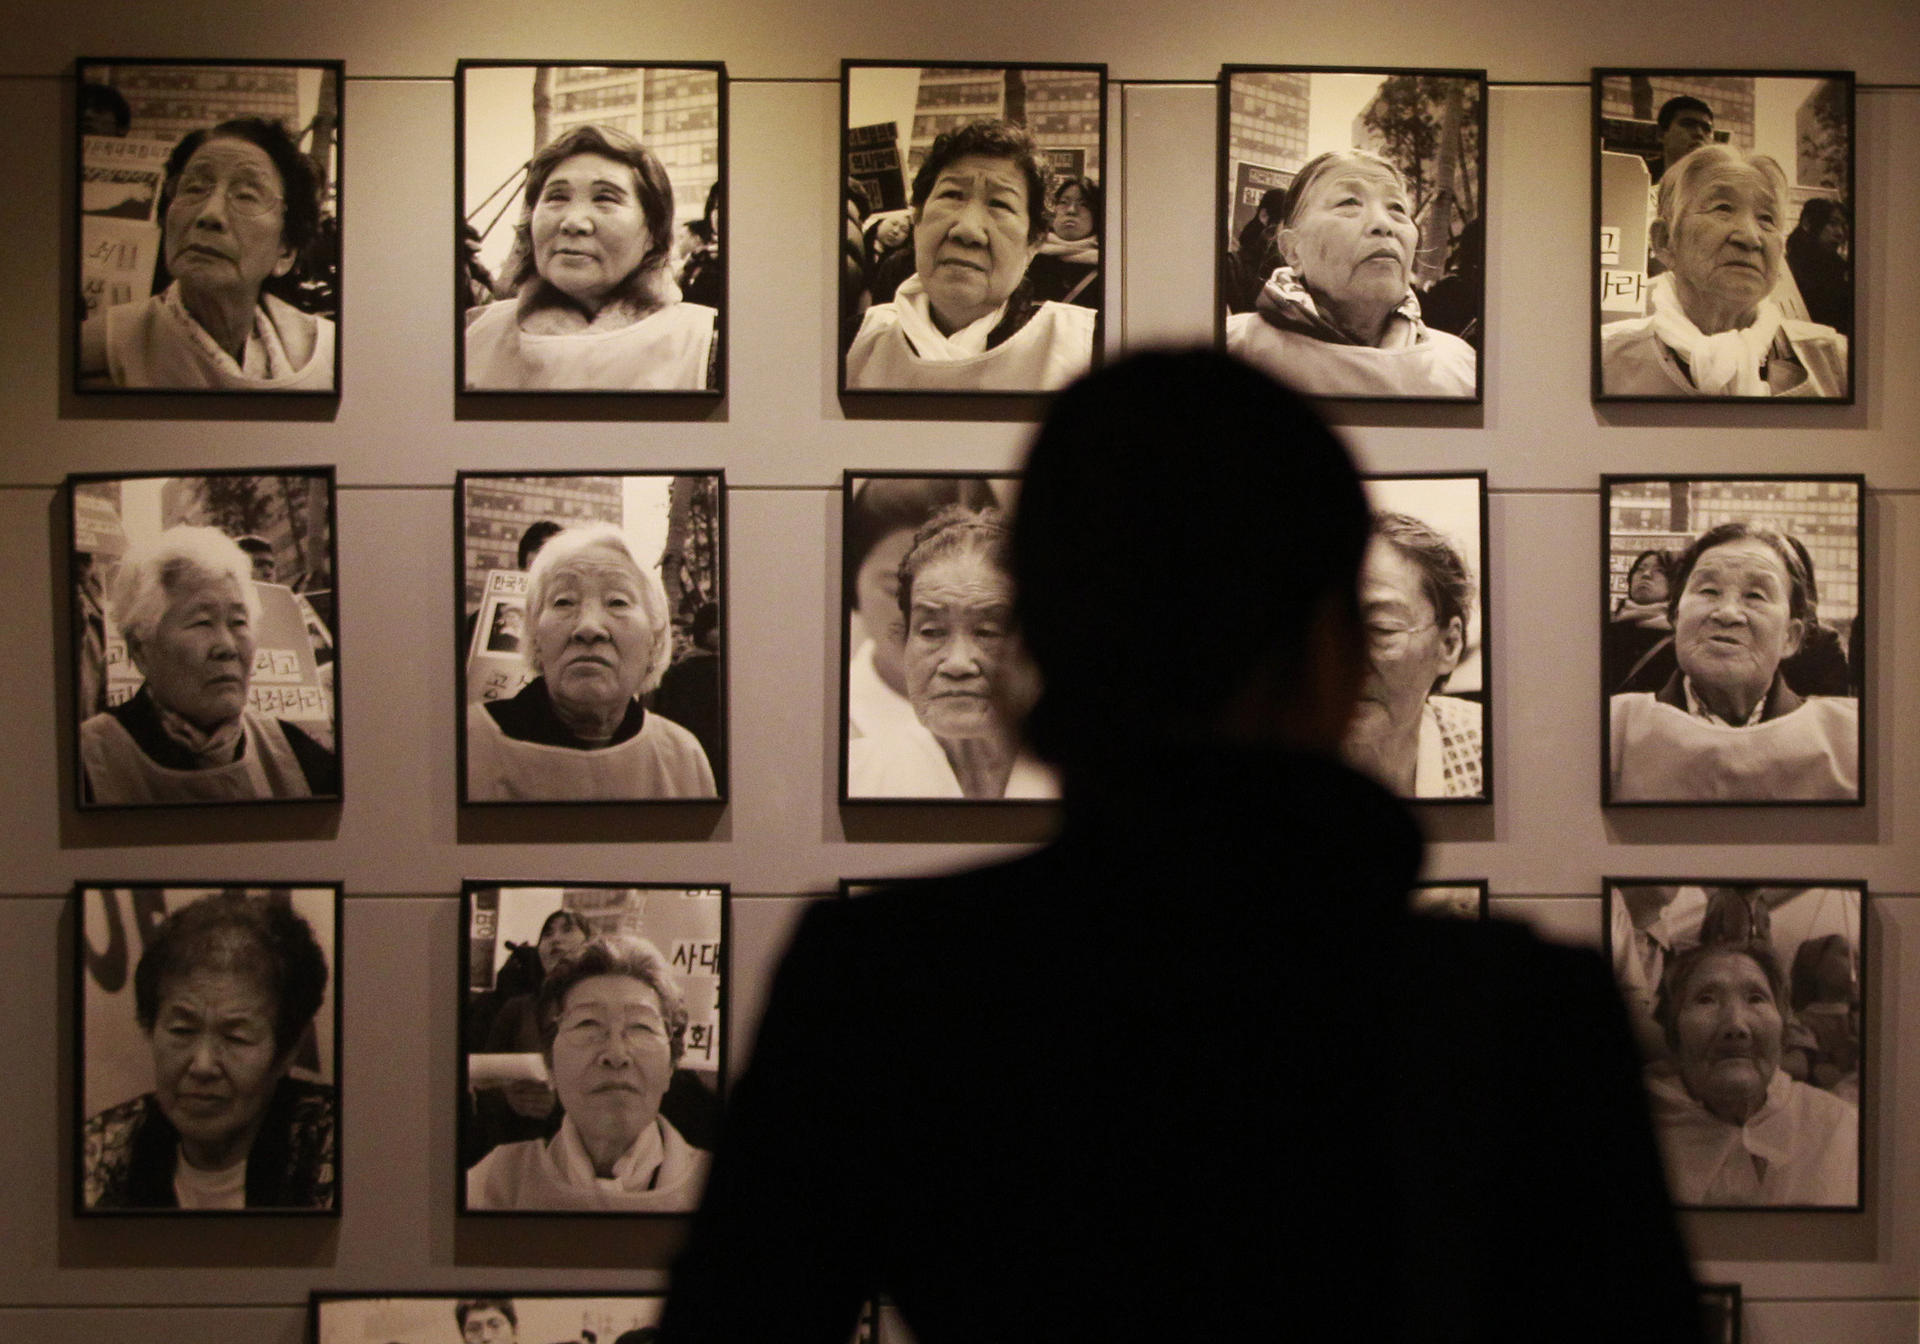 Photos of former "comfort women" are a reminder of the slavery in which Japanese soldiers engaged at locations it occupied during the second world war. Photo: AP